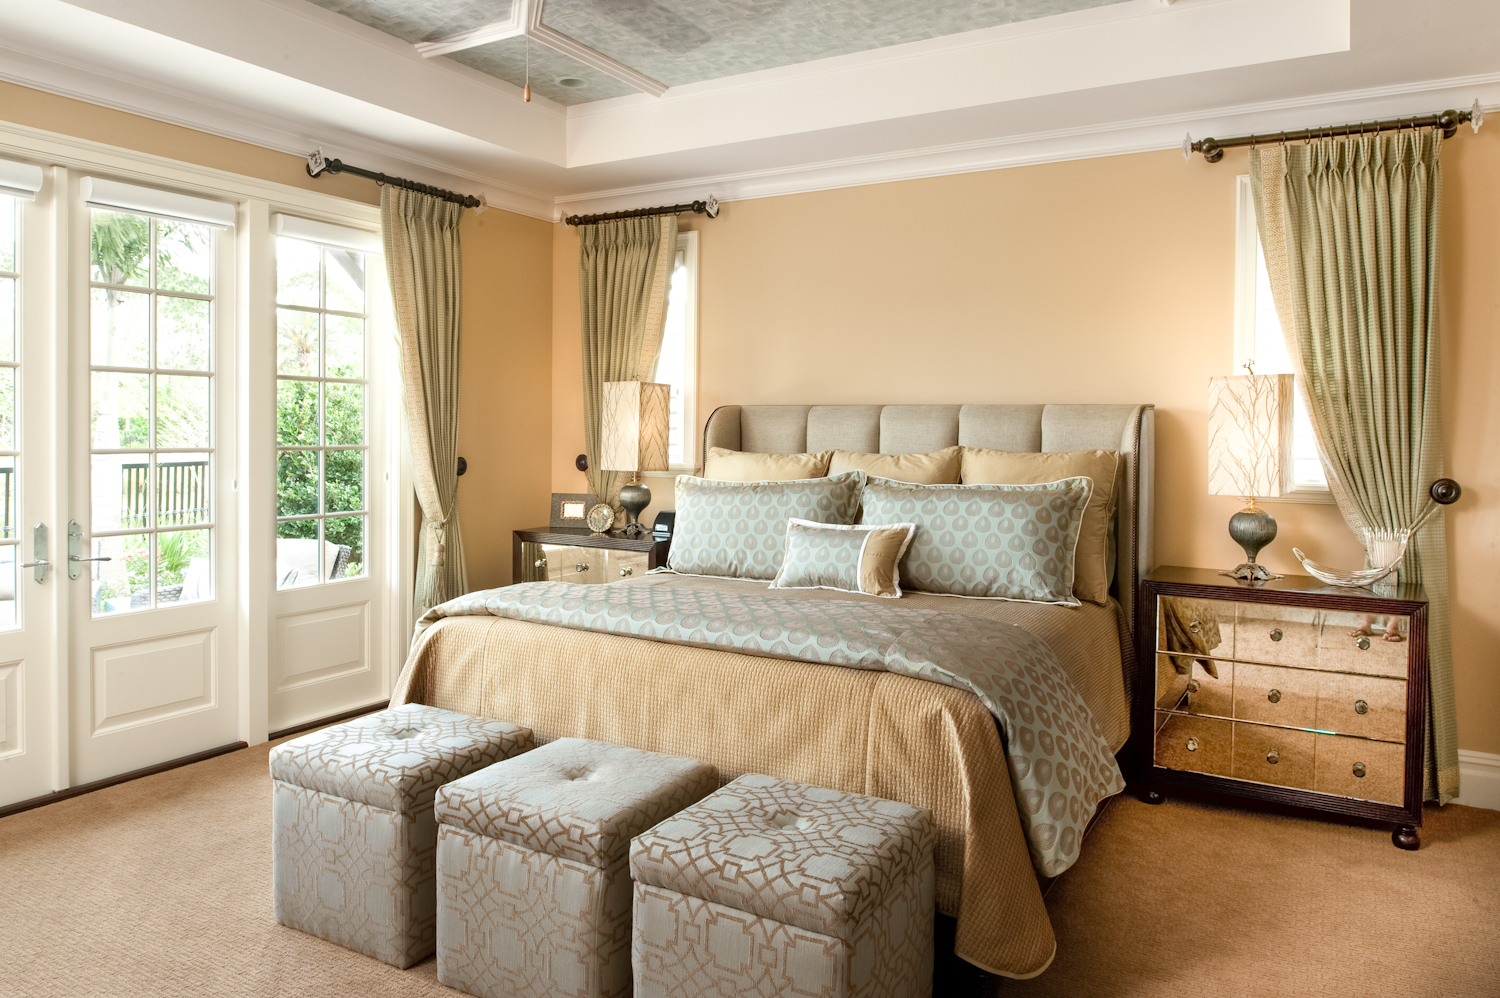 45 Master Bedroom Ideas For Your Home - The WoW Style